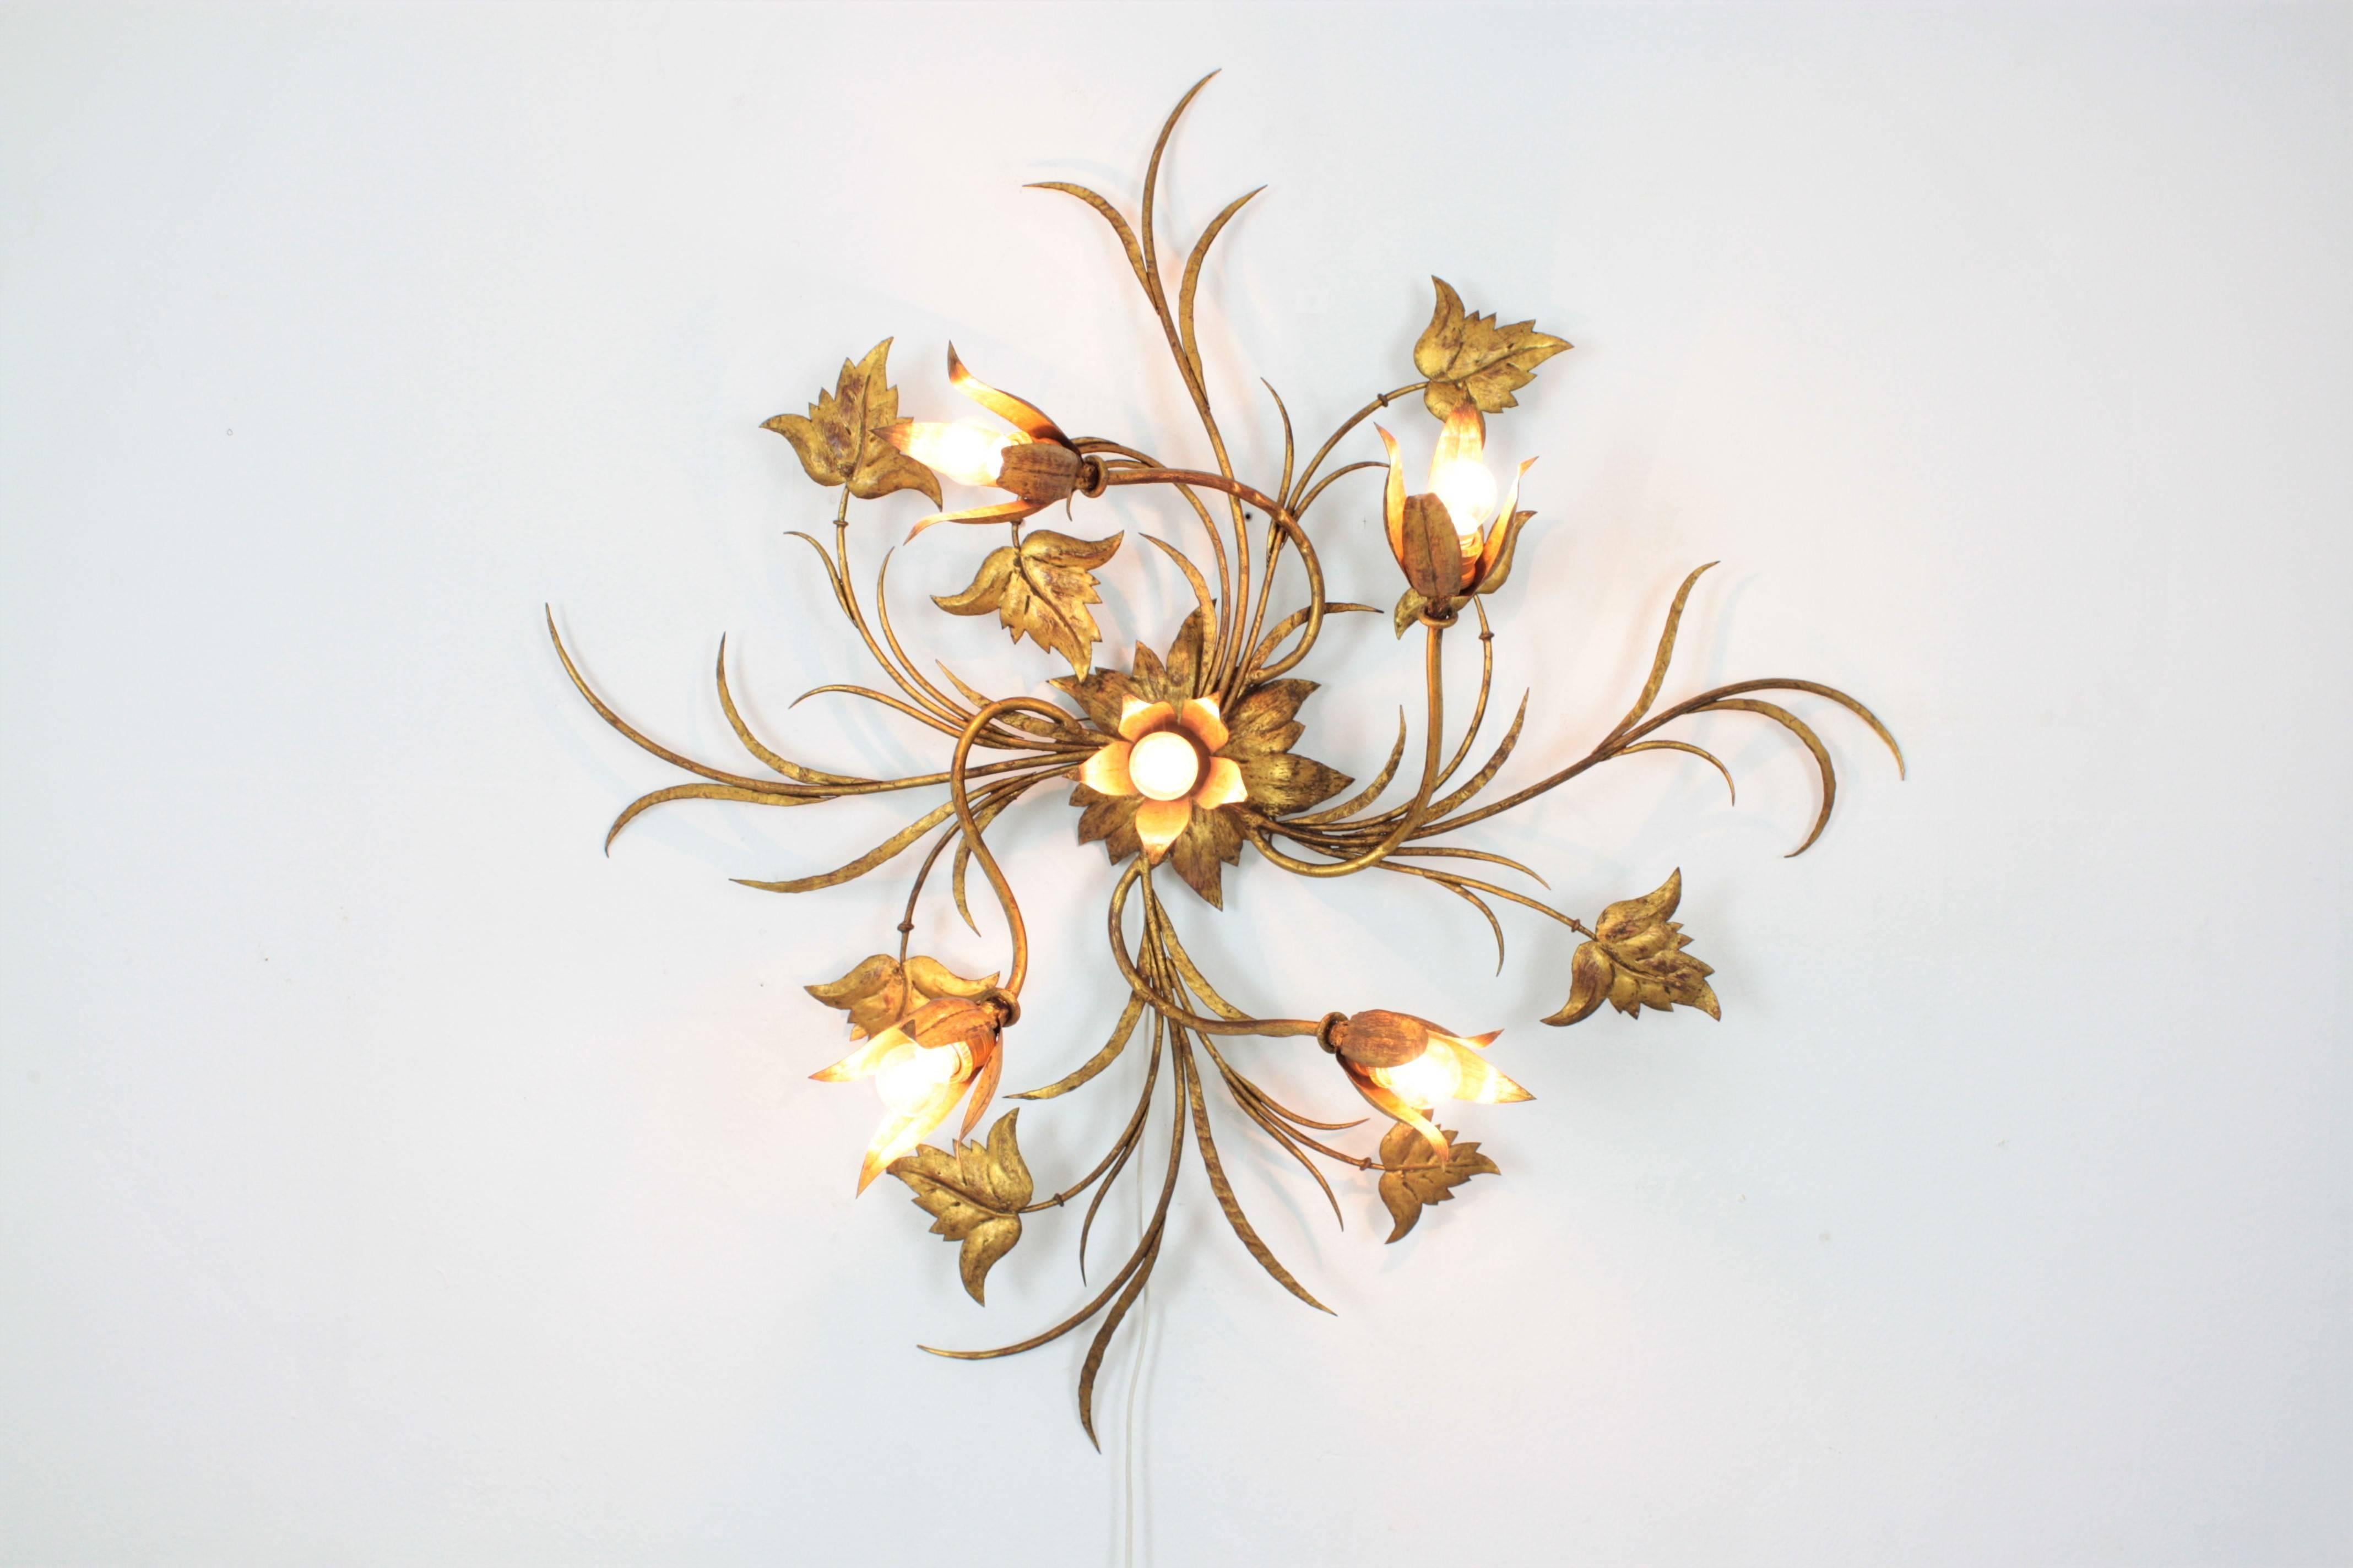 Magnificent hand-hammered wrought iron five-light wall sconce, ceiling sconce or wall decoration with gold leaf finish. This sconce has a naturalistic design with leaves and flowers in the style of Art Nouveau. The lamp has floral bulb holders, a